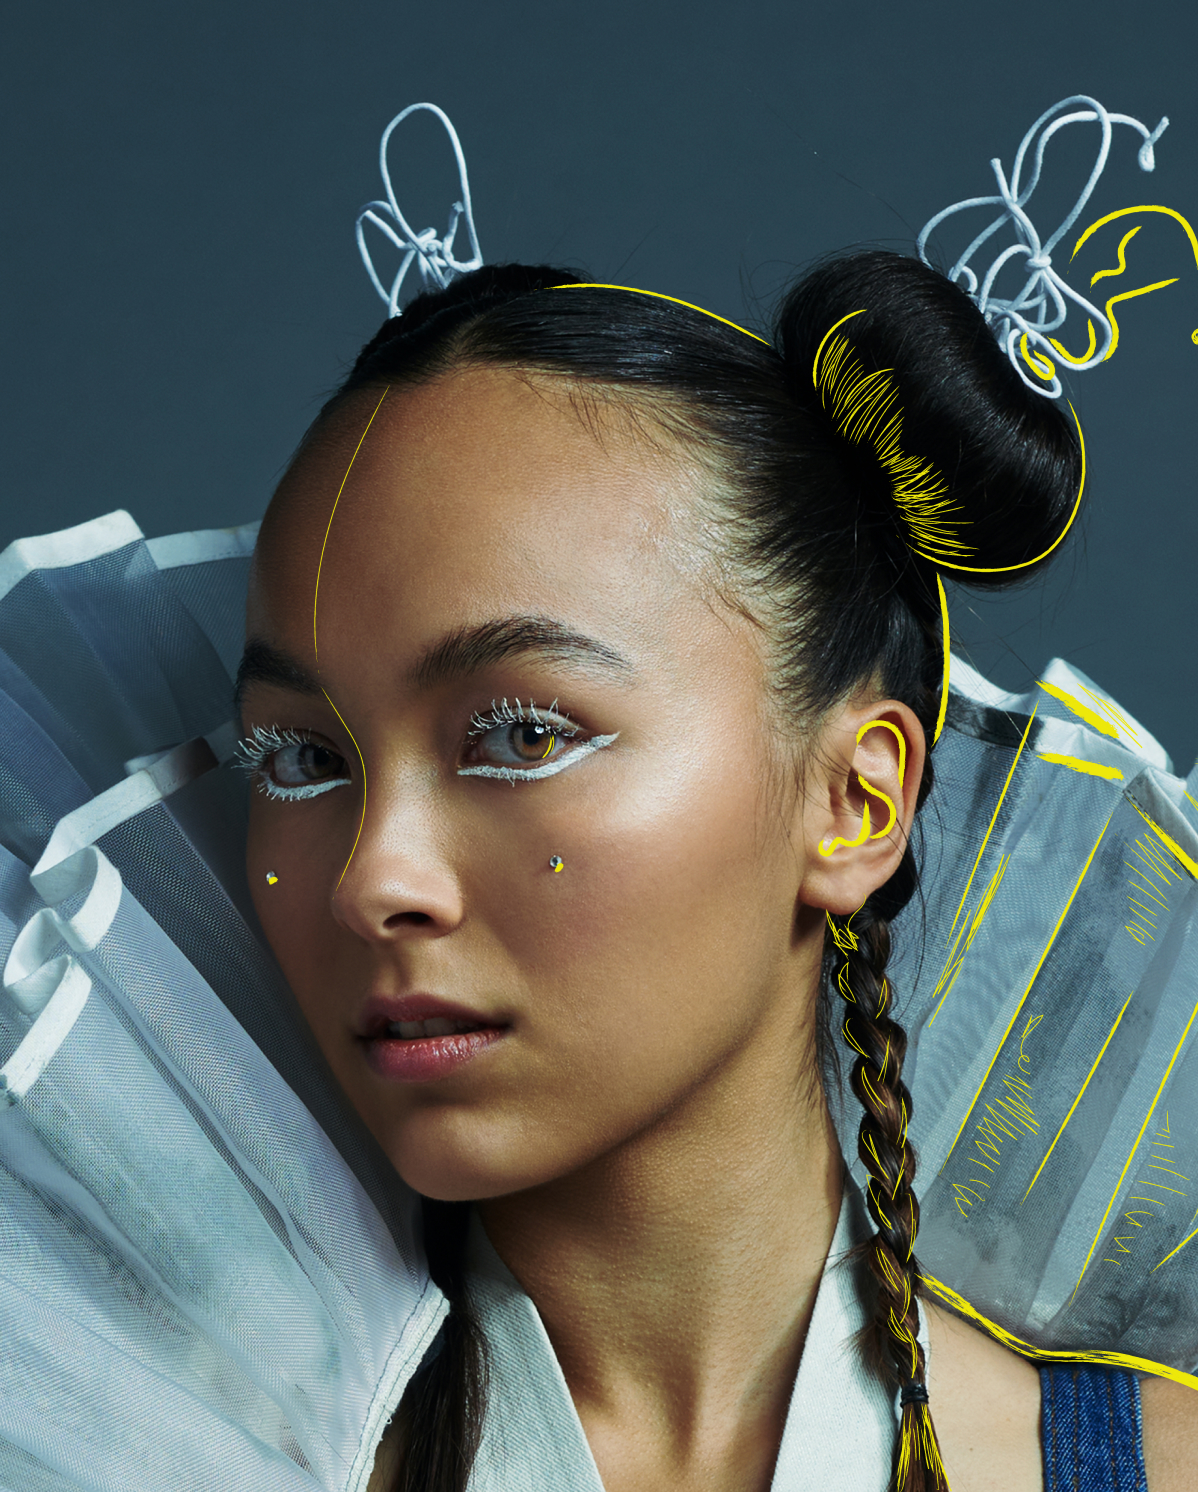 A portrait of a young person with intricate makeup and hair styling. Hair is styled in two braids and a bun with white and yellow accents. White makeup details highlight eyes and face. They wear a high-collared, ruffled garment against a gray background.